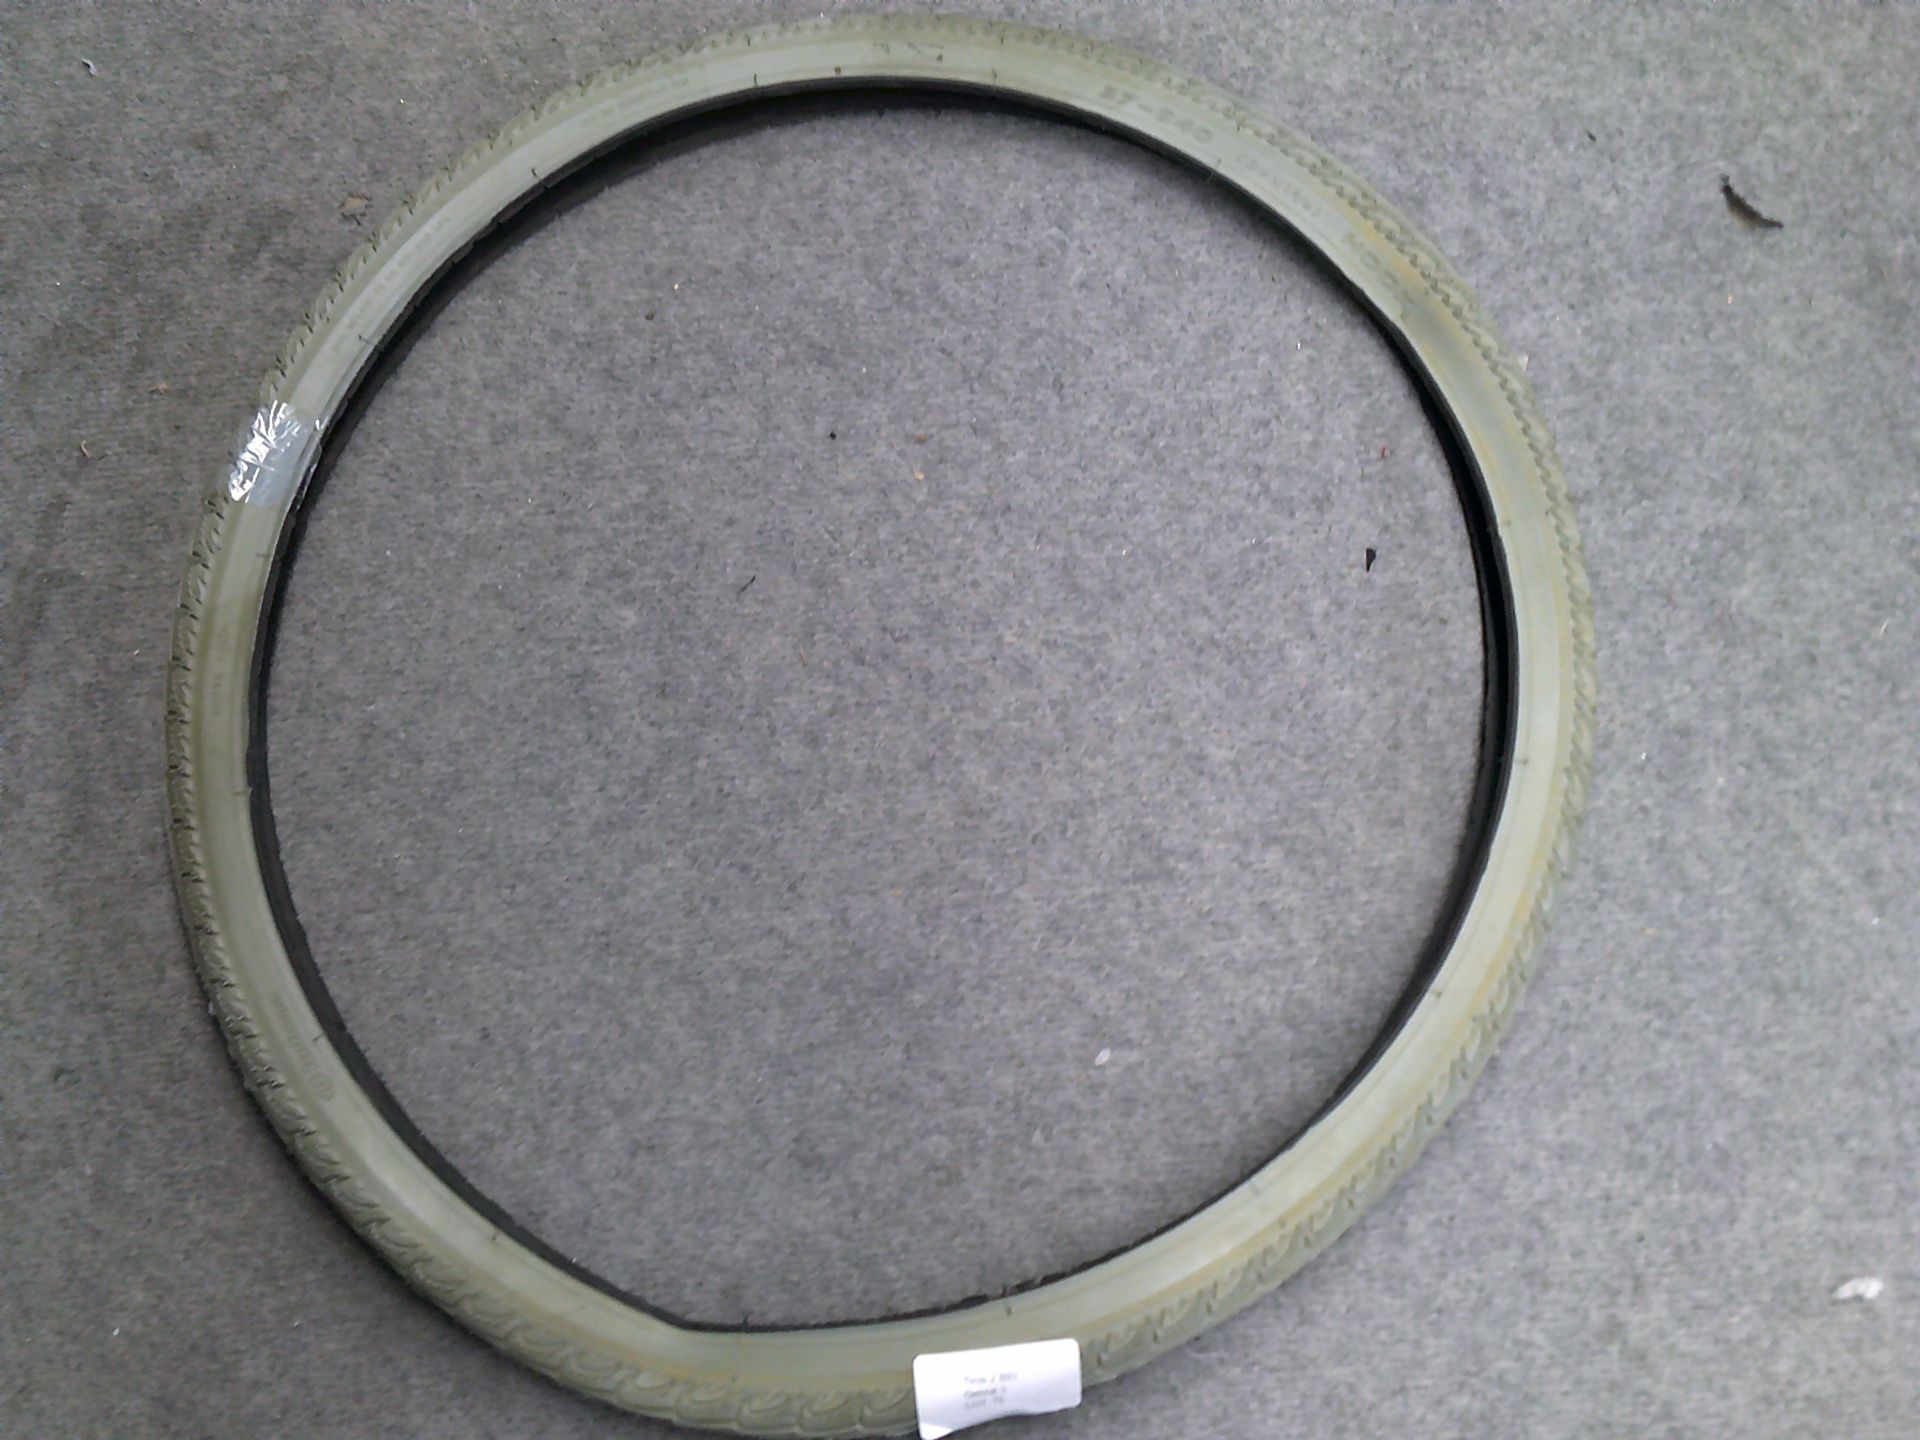 Bike tyre (Delivery Band A)